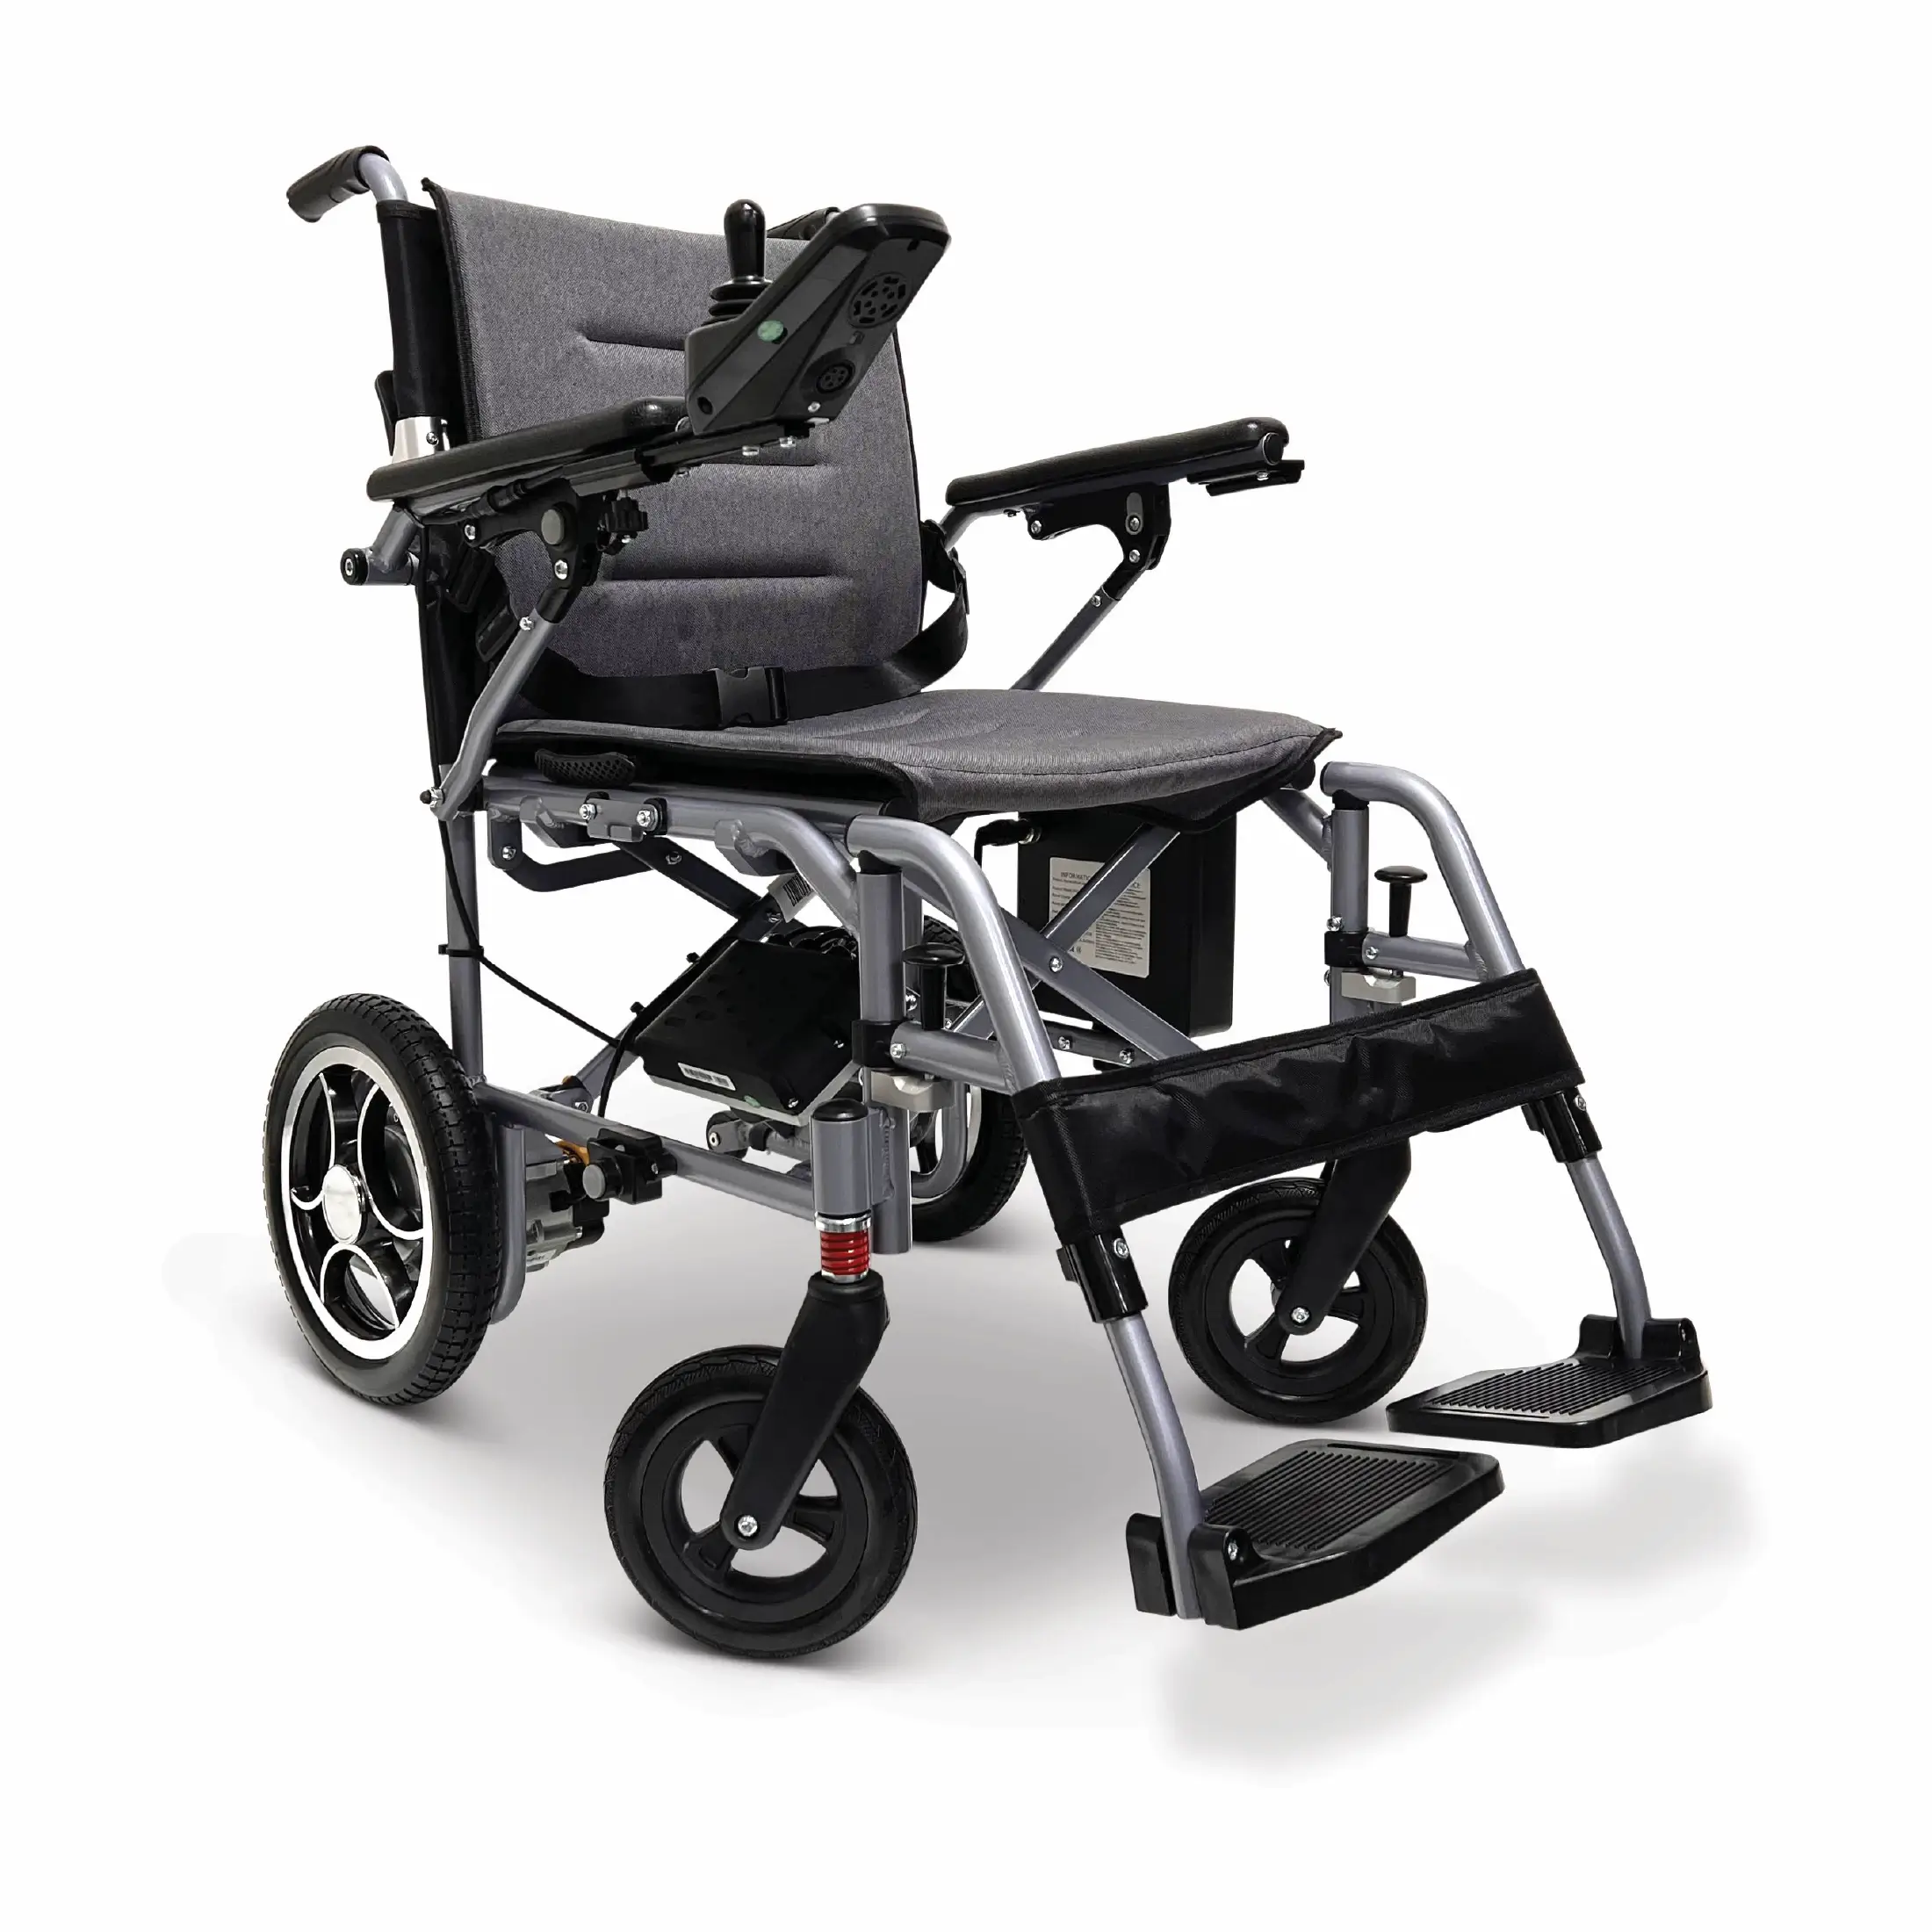 ComfyGOX 7LightweightFoldableElectricWheelchairforTravelwithRemoteControlProductPictures7